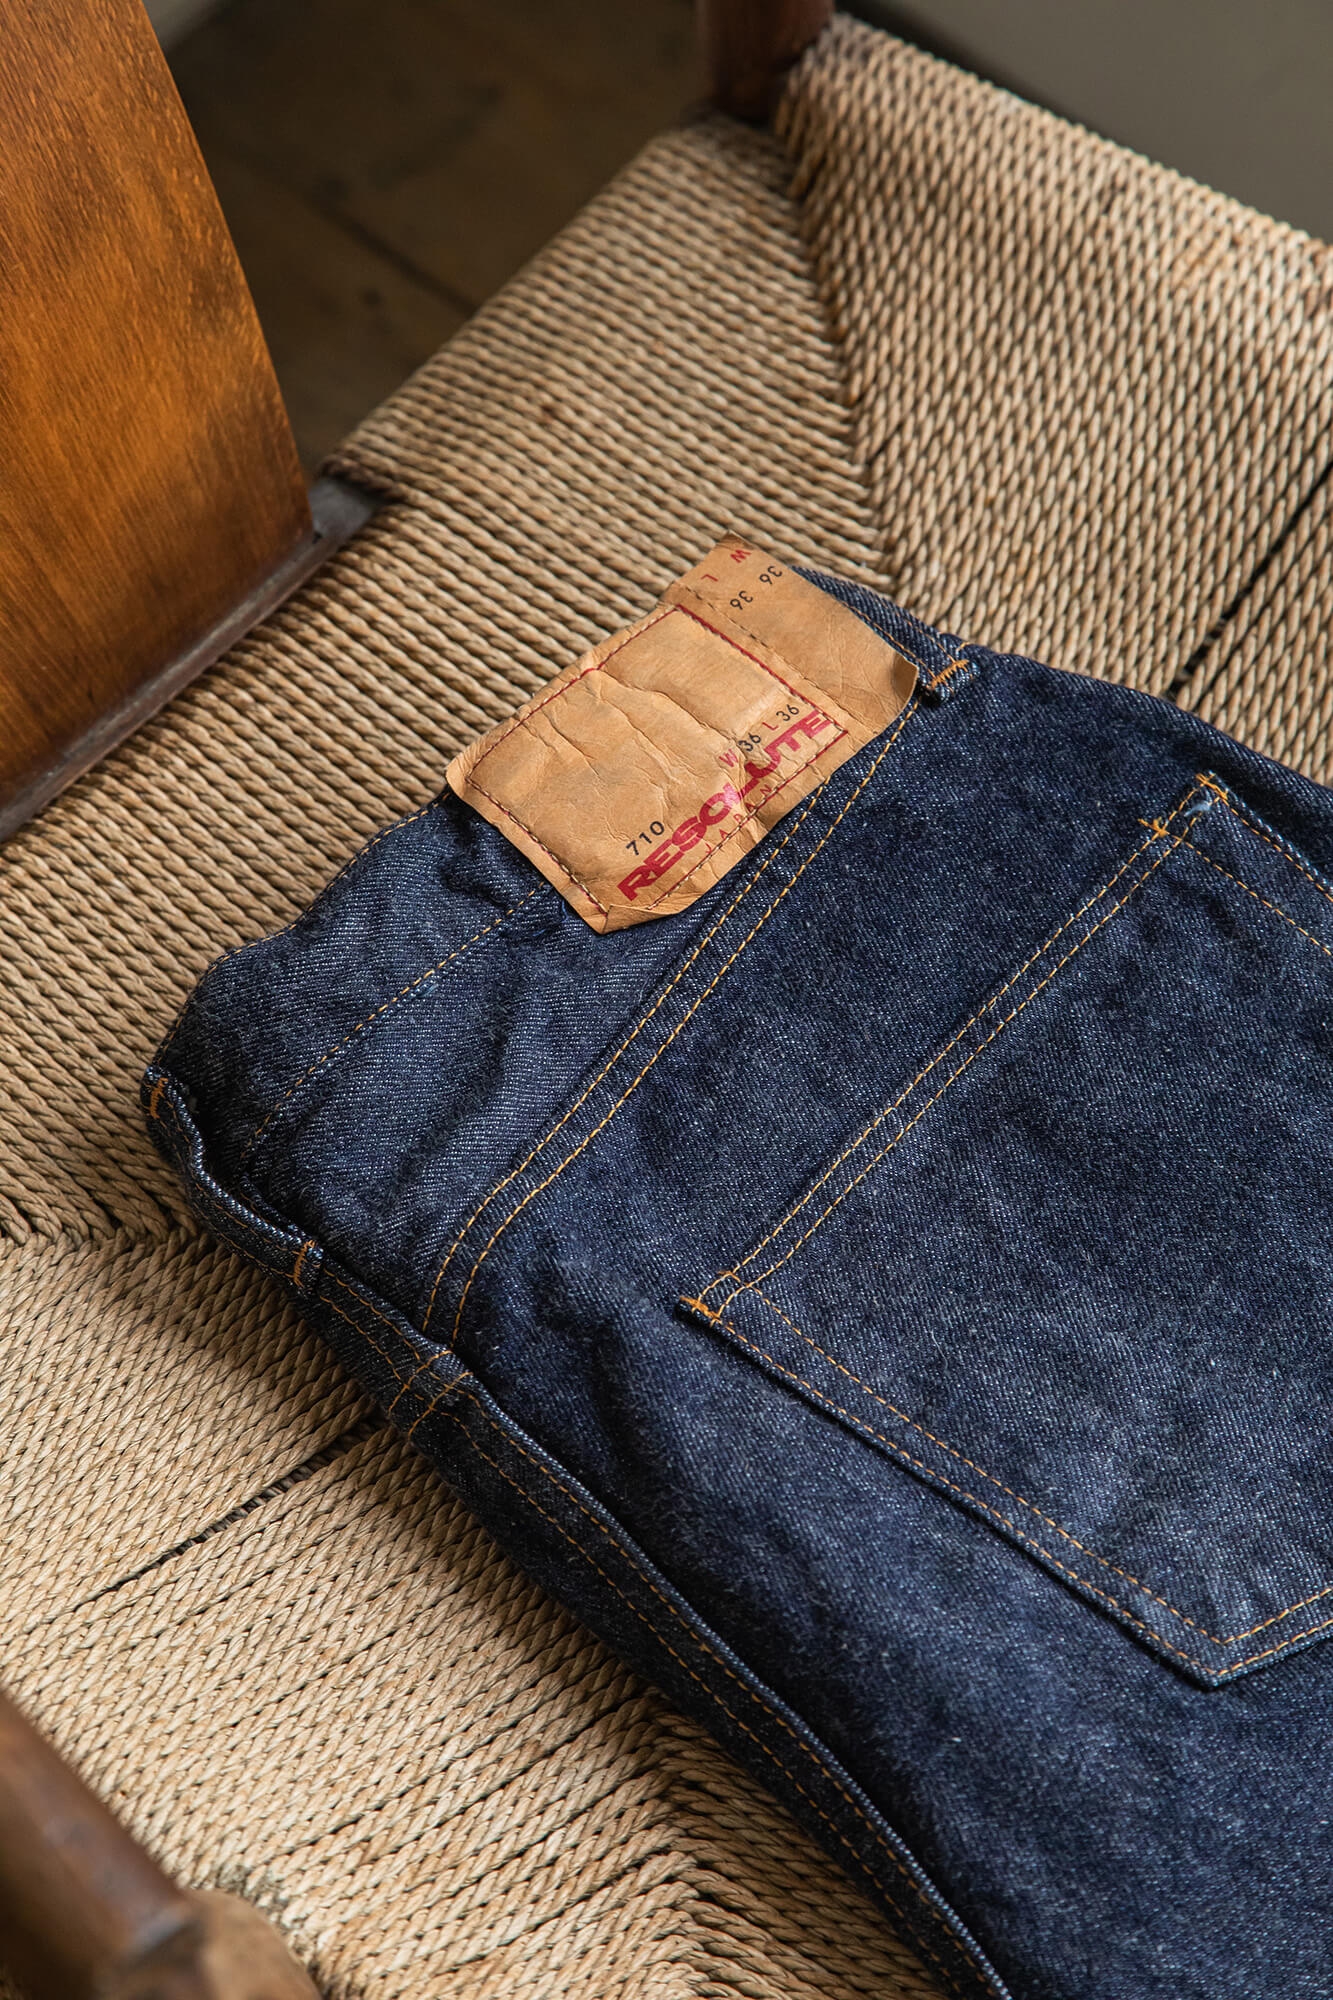 Resolute 710 jeans folded on a chair